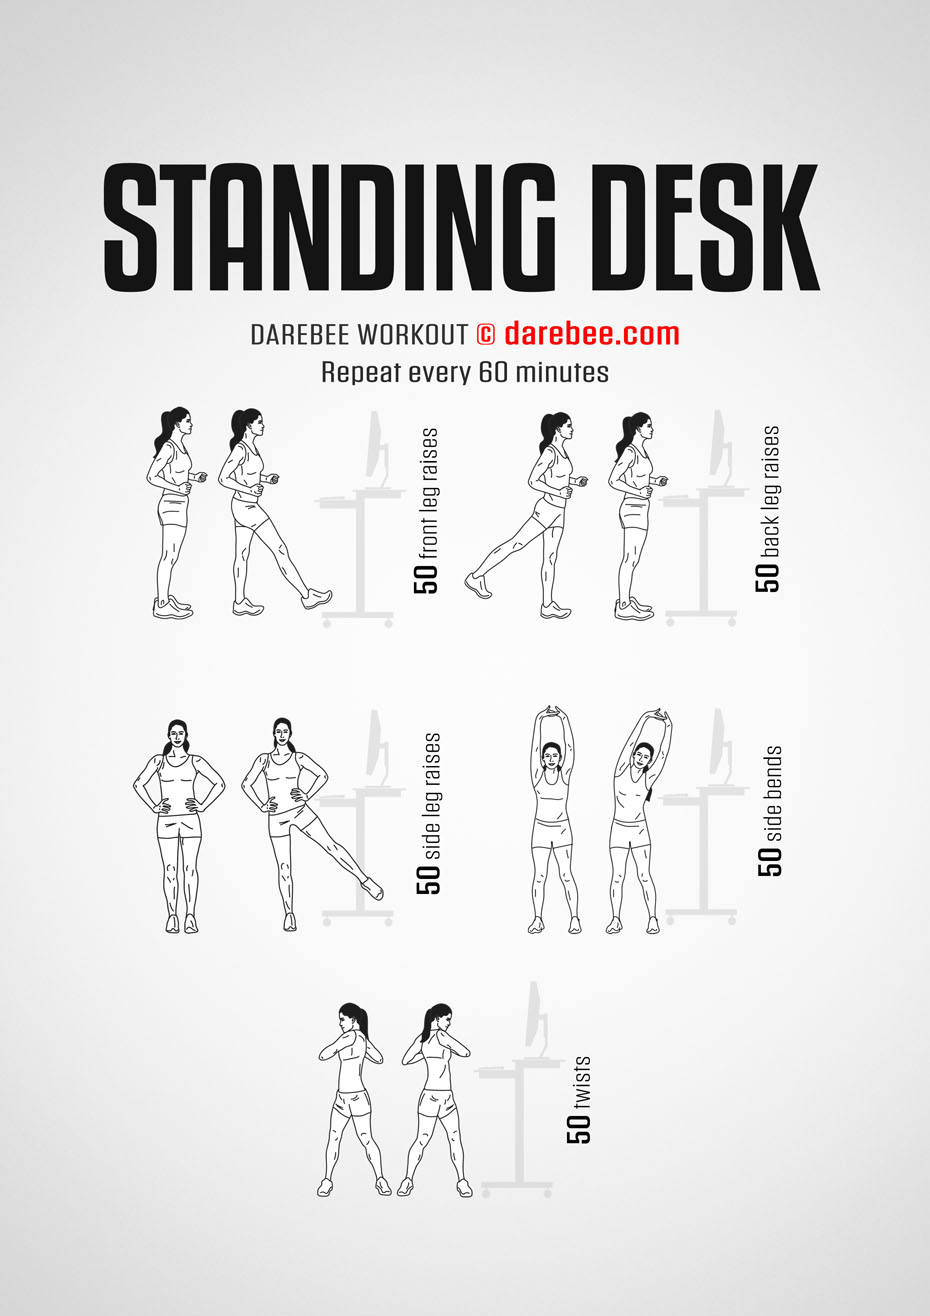 5 Exercises You Can Do at Your Desk – OhioHealth